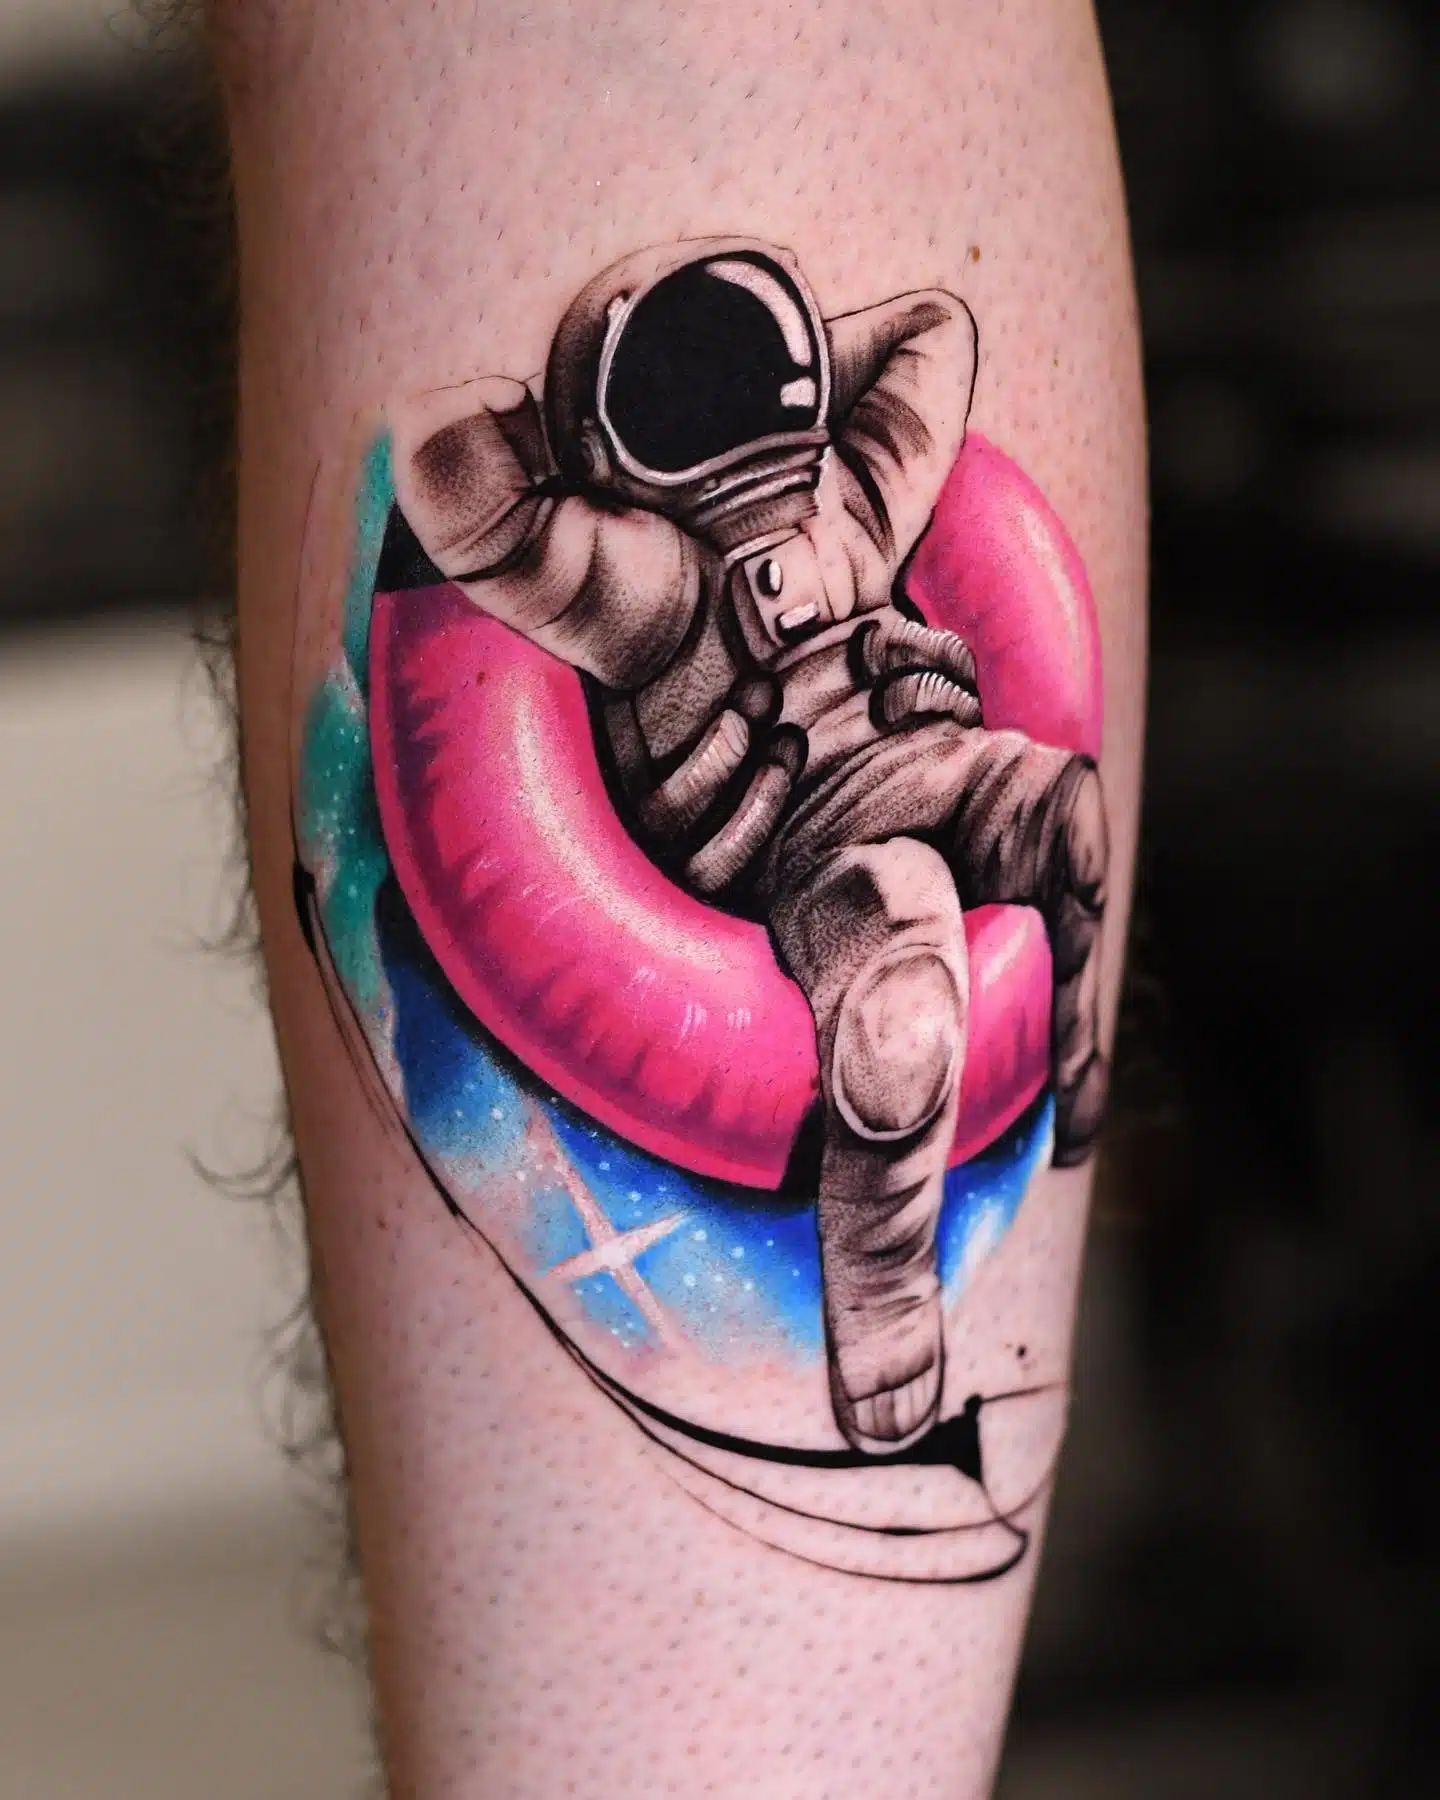 200+ Astronaut Tattoos That Let You Reach For The Stars